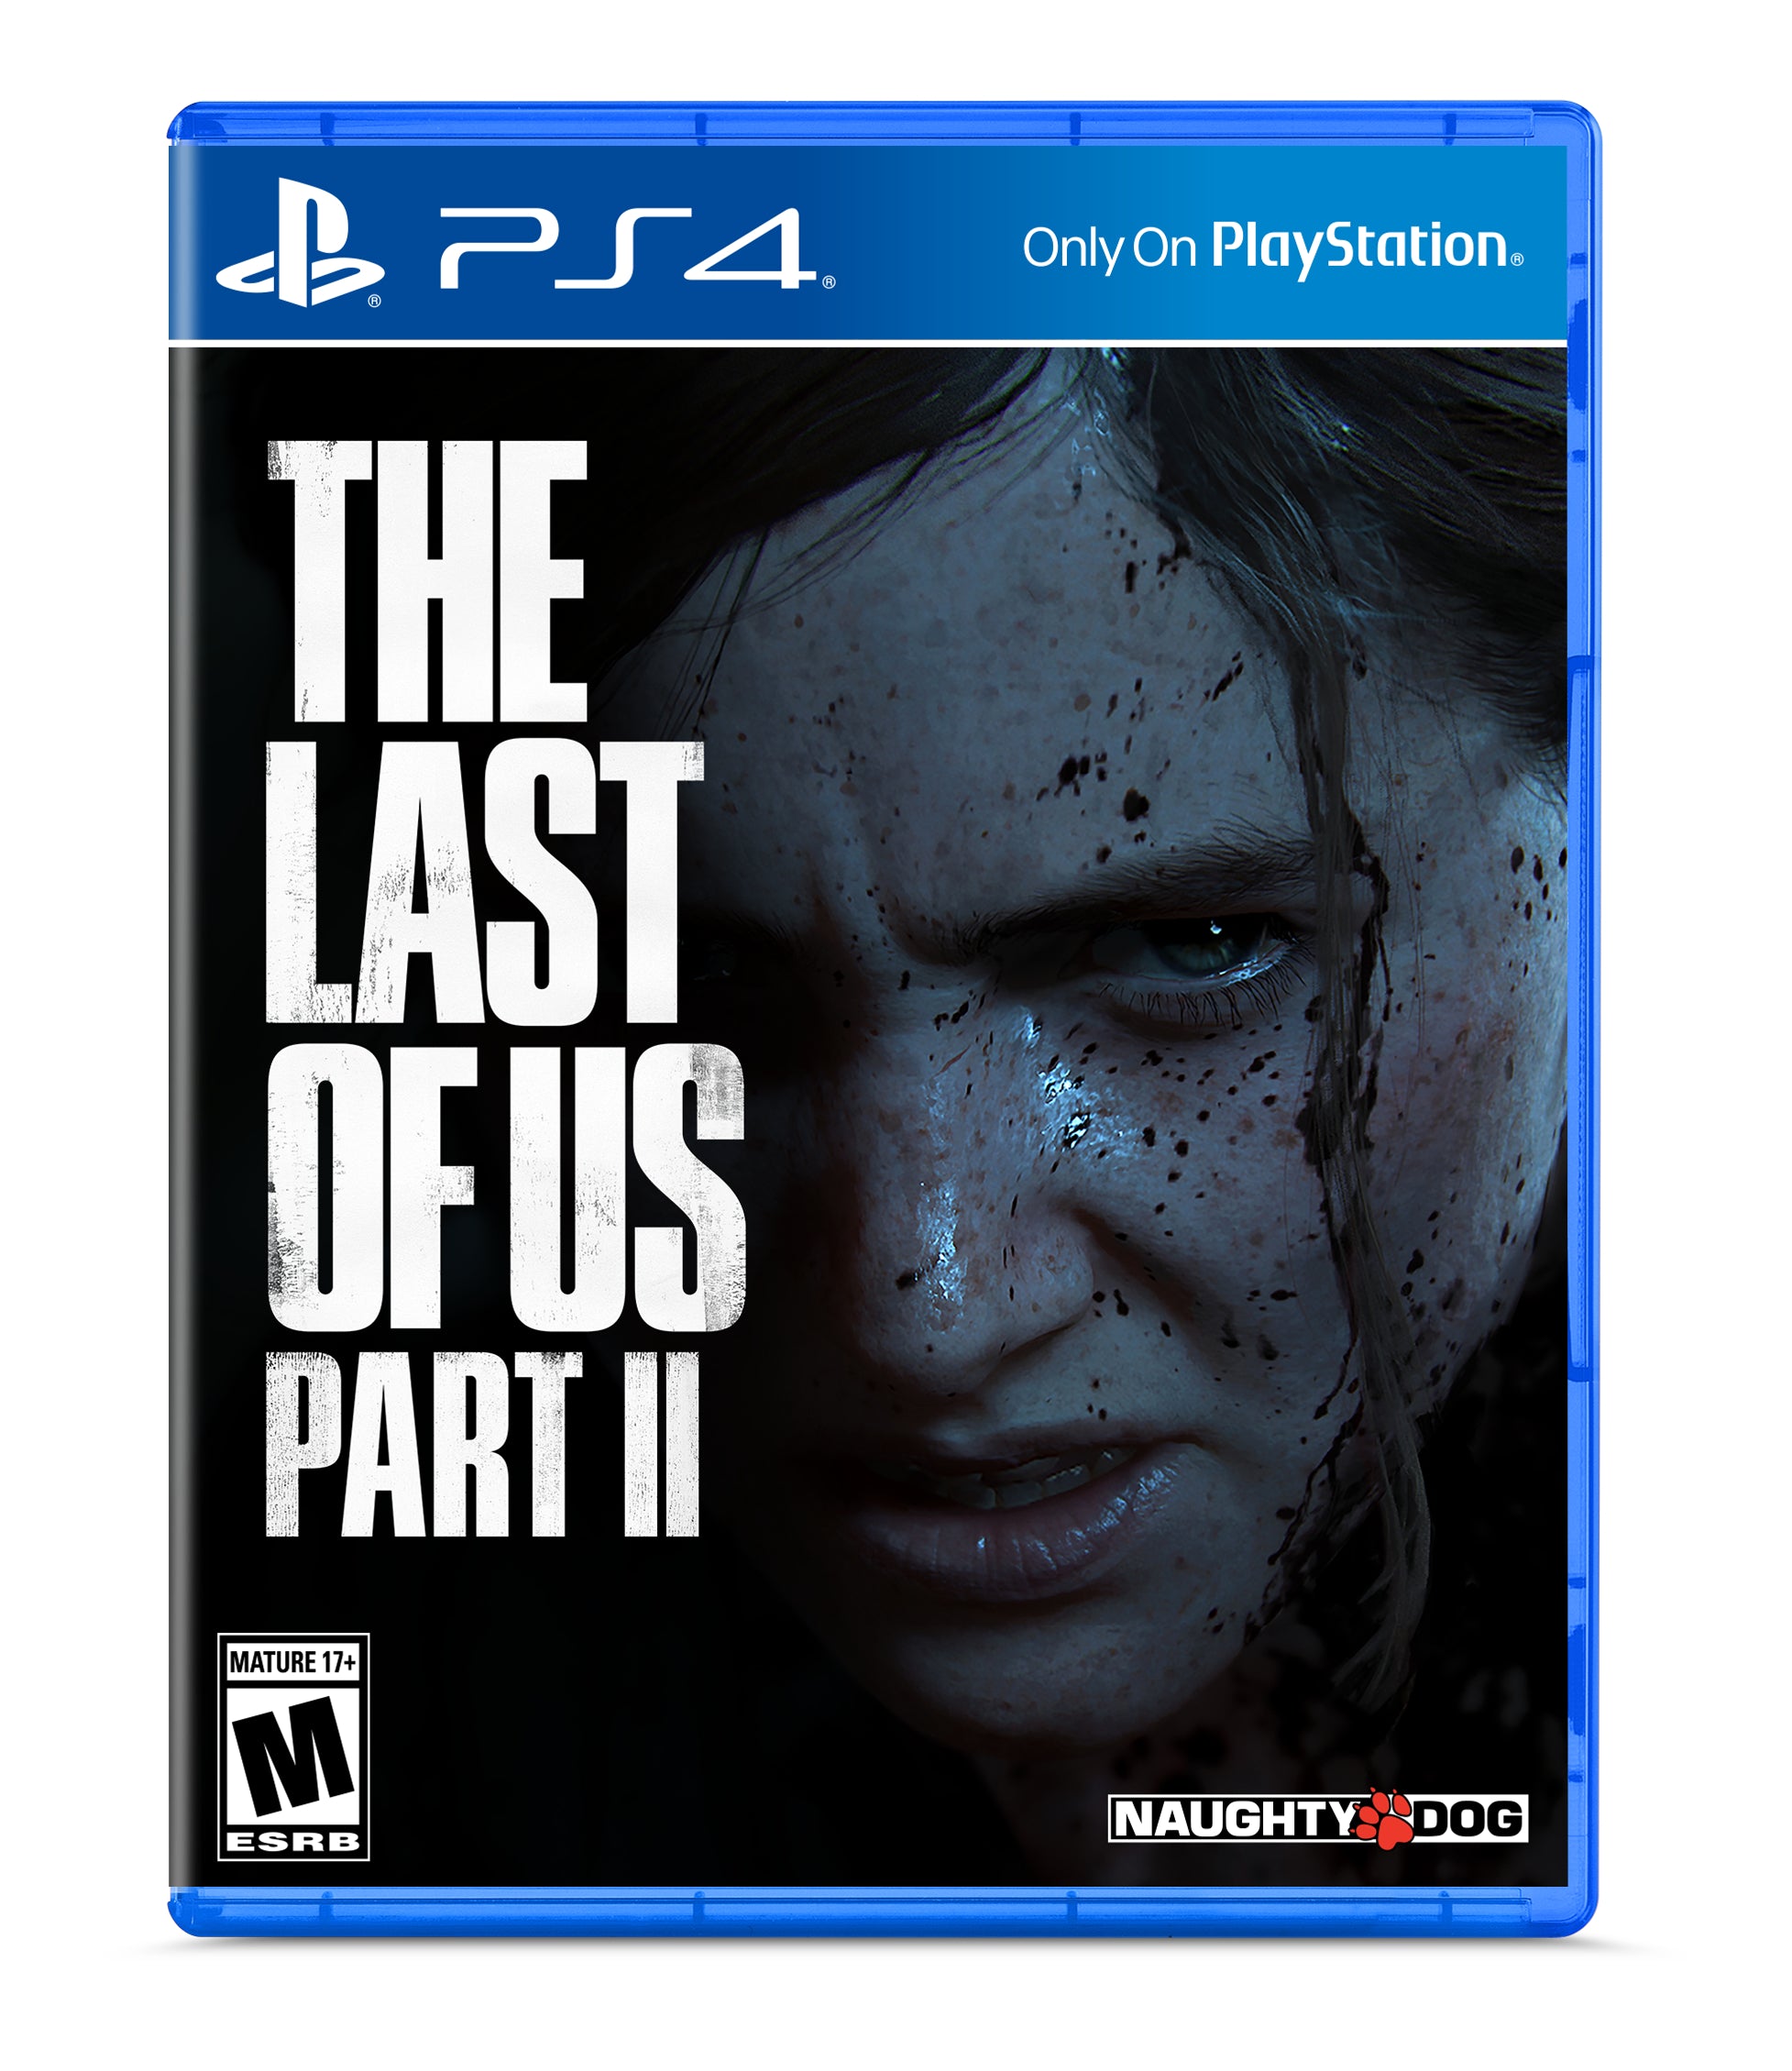 Sony PlayStation 4 Slim The Last of Us Part II Bundle Upgrade 2TB HDD PS4 Gaming Console, Jet Black, with Mytrix Chat Headset - Large Capacity Internal Hard Drive Enhanced PS4 Console